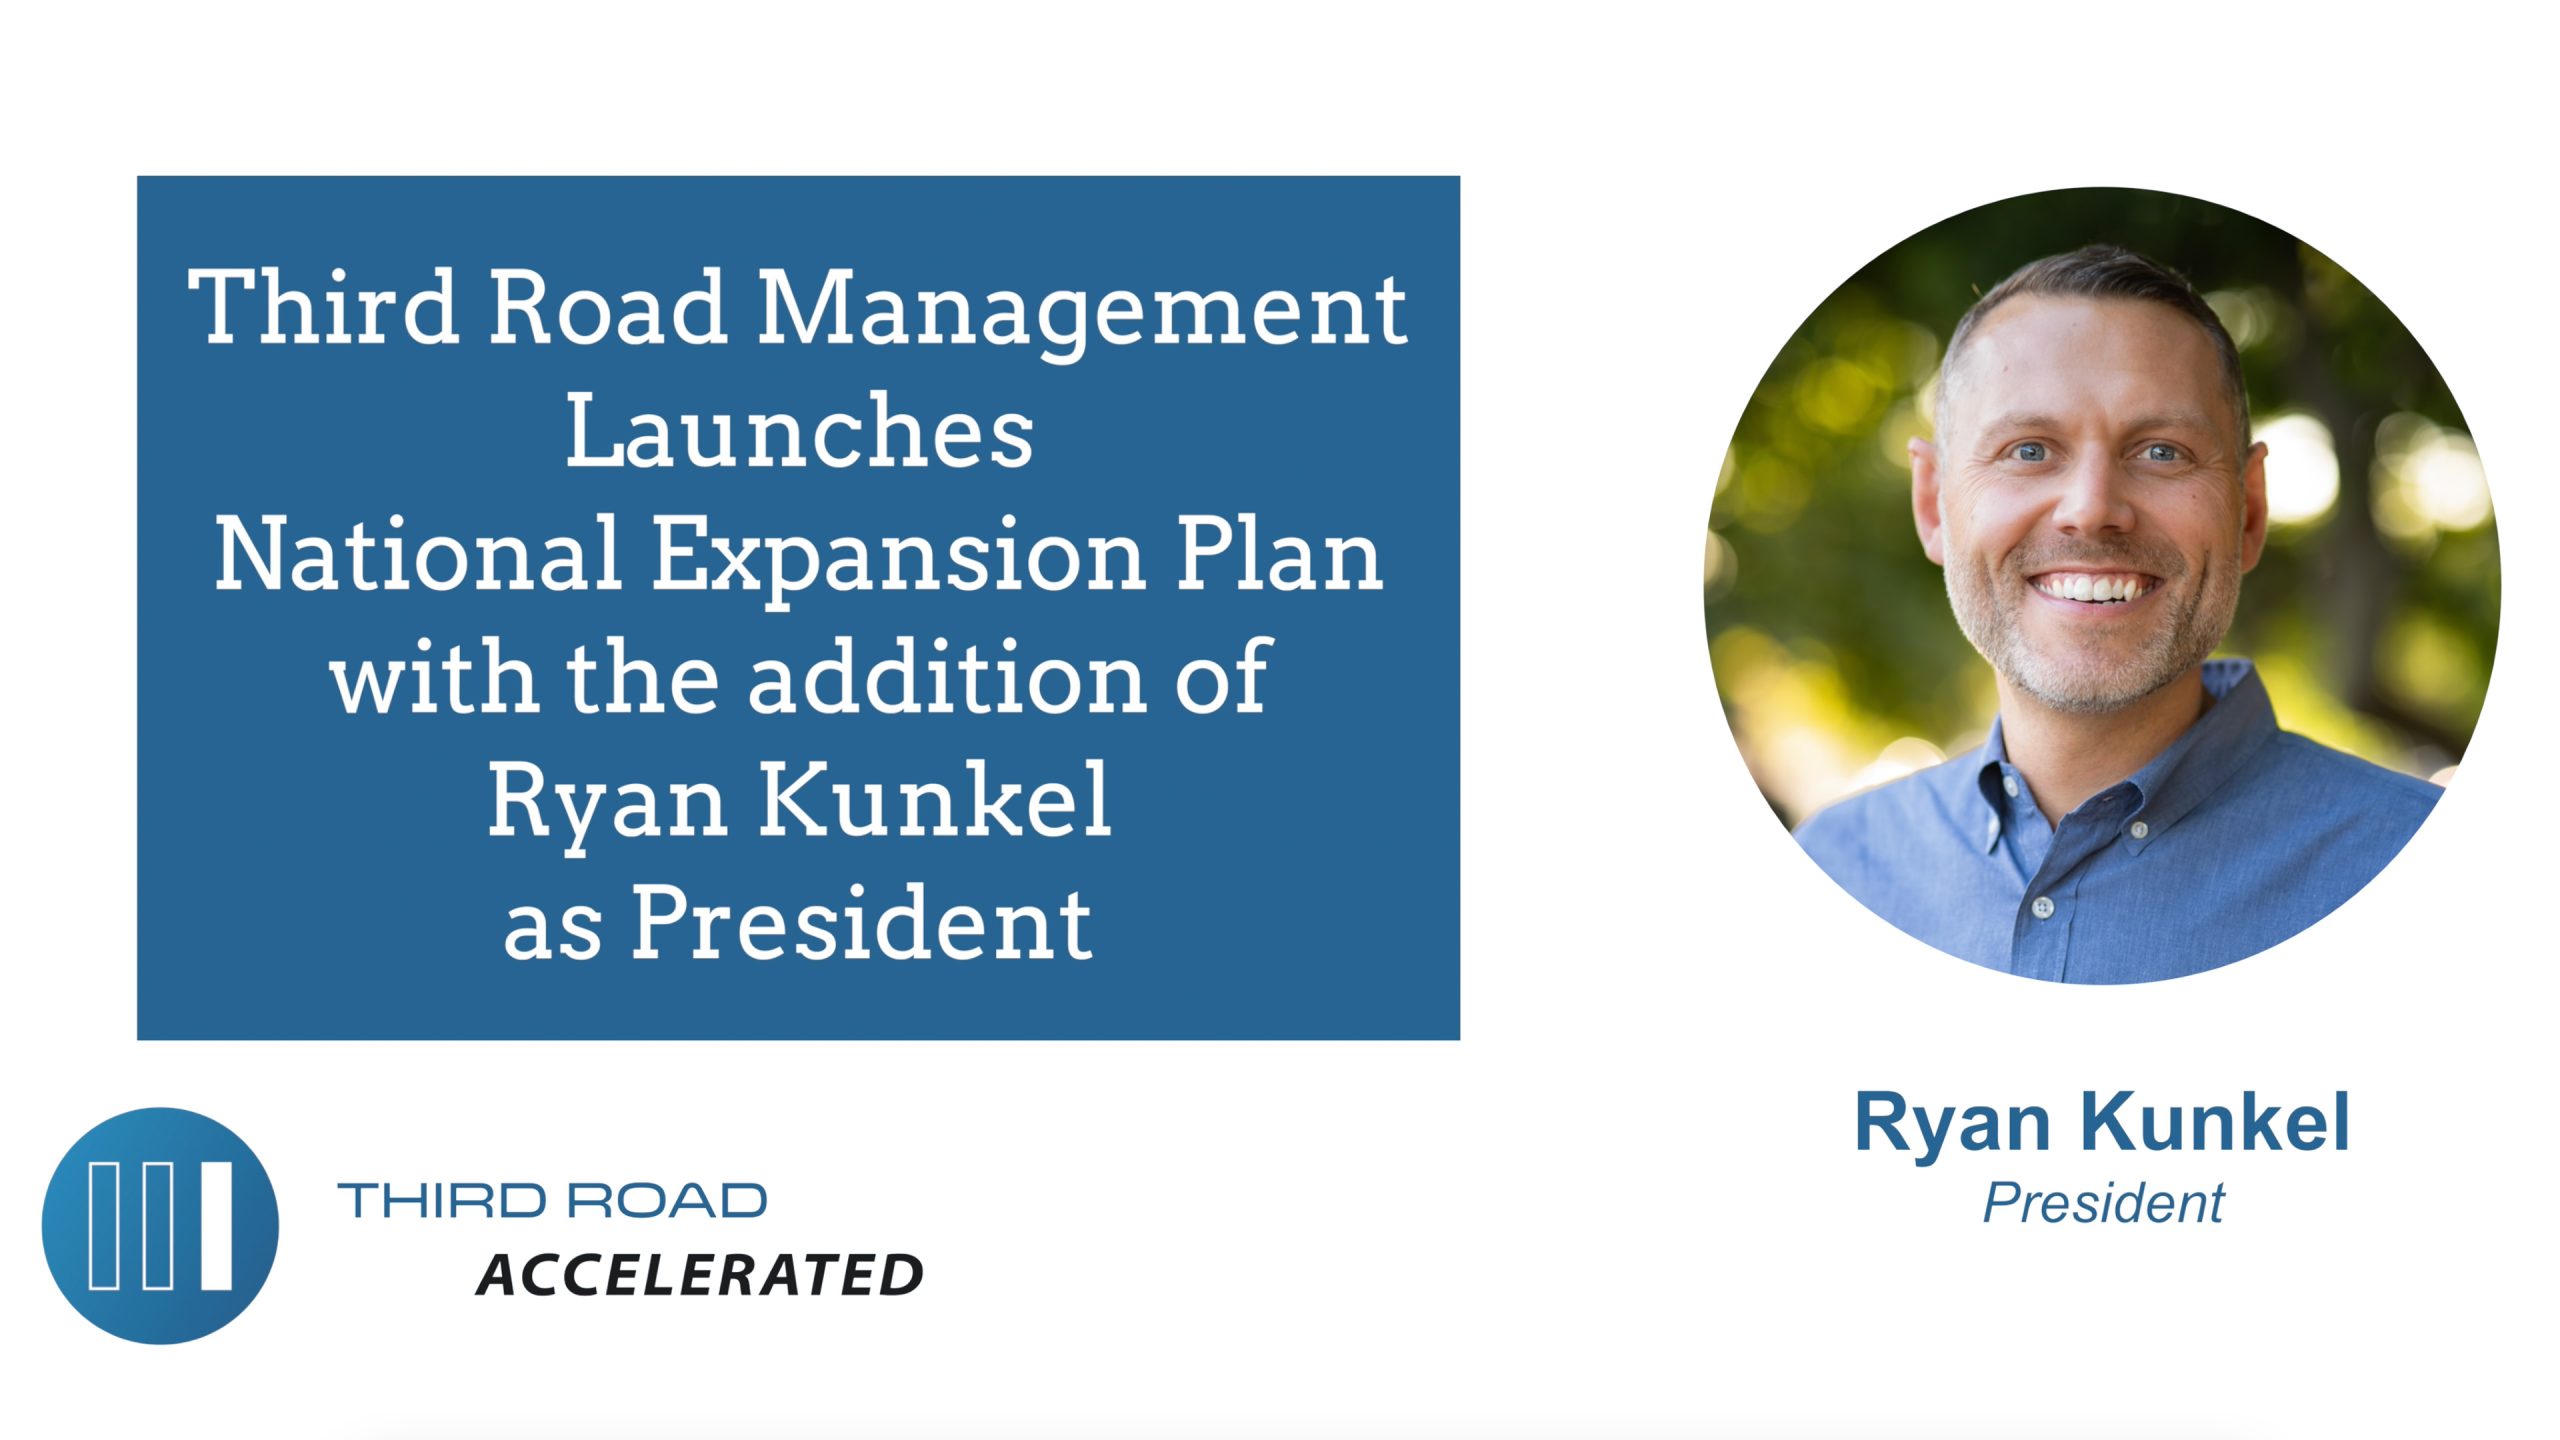 THIRD ROAD MANAGEMENT LAUNCHES NATIONAL EXPANSION PLAN WITH THE ADDITION OF RYAN KUNKEL AS PRESIDENT